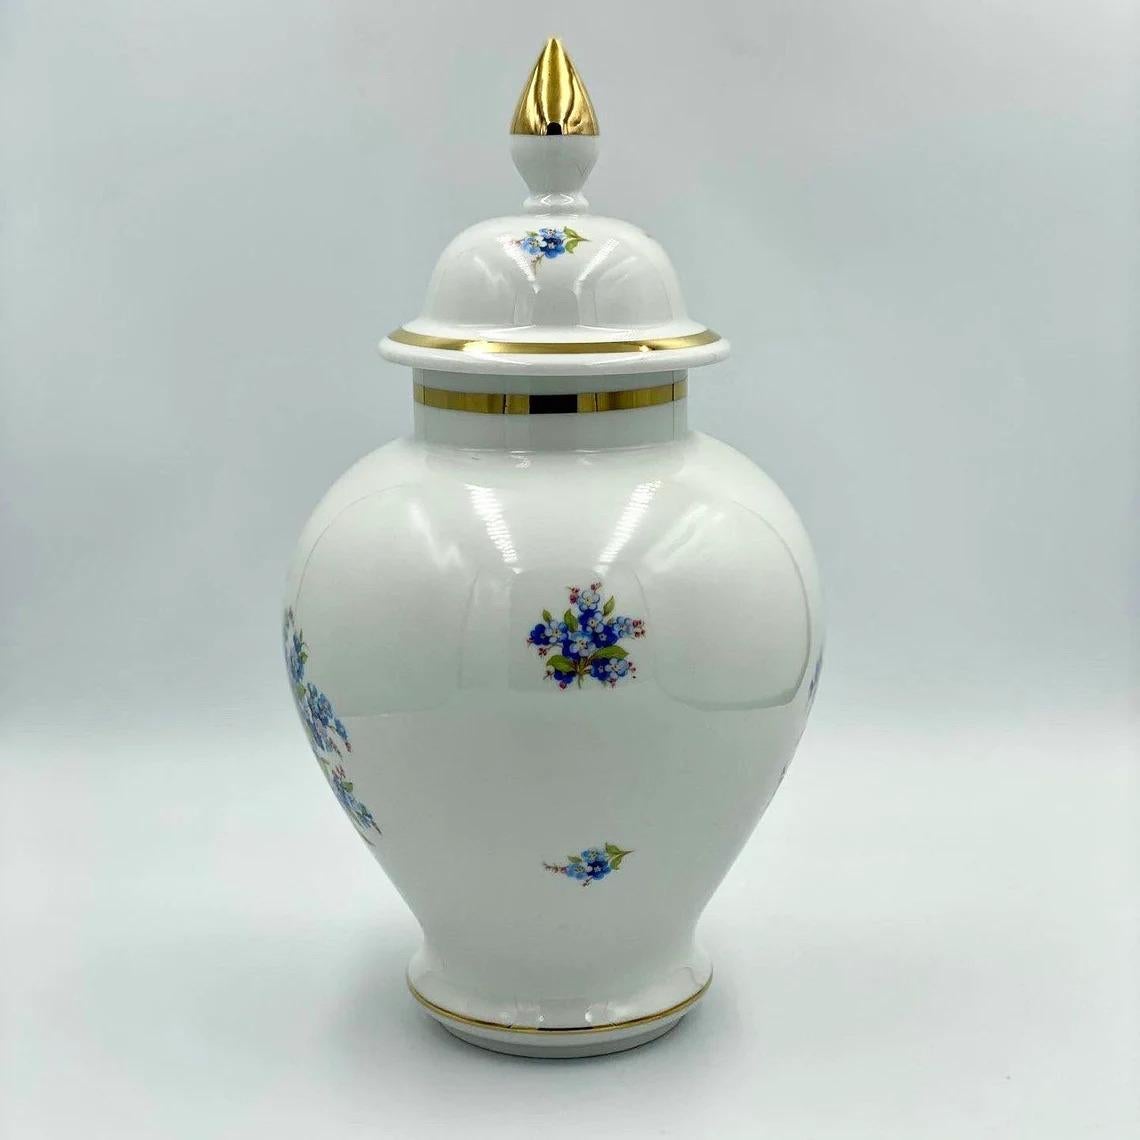 Schumann Arzberg, Germany, porcelain wild flowers gold trim.

Very nice Schumann porcelain white vase or urn with some gold wear. This features a bouquet of blue wild flowers with several smaller sprigs on the other sides. It has a rim with gold